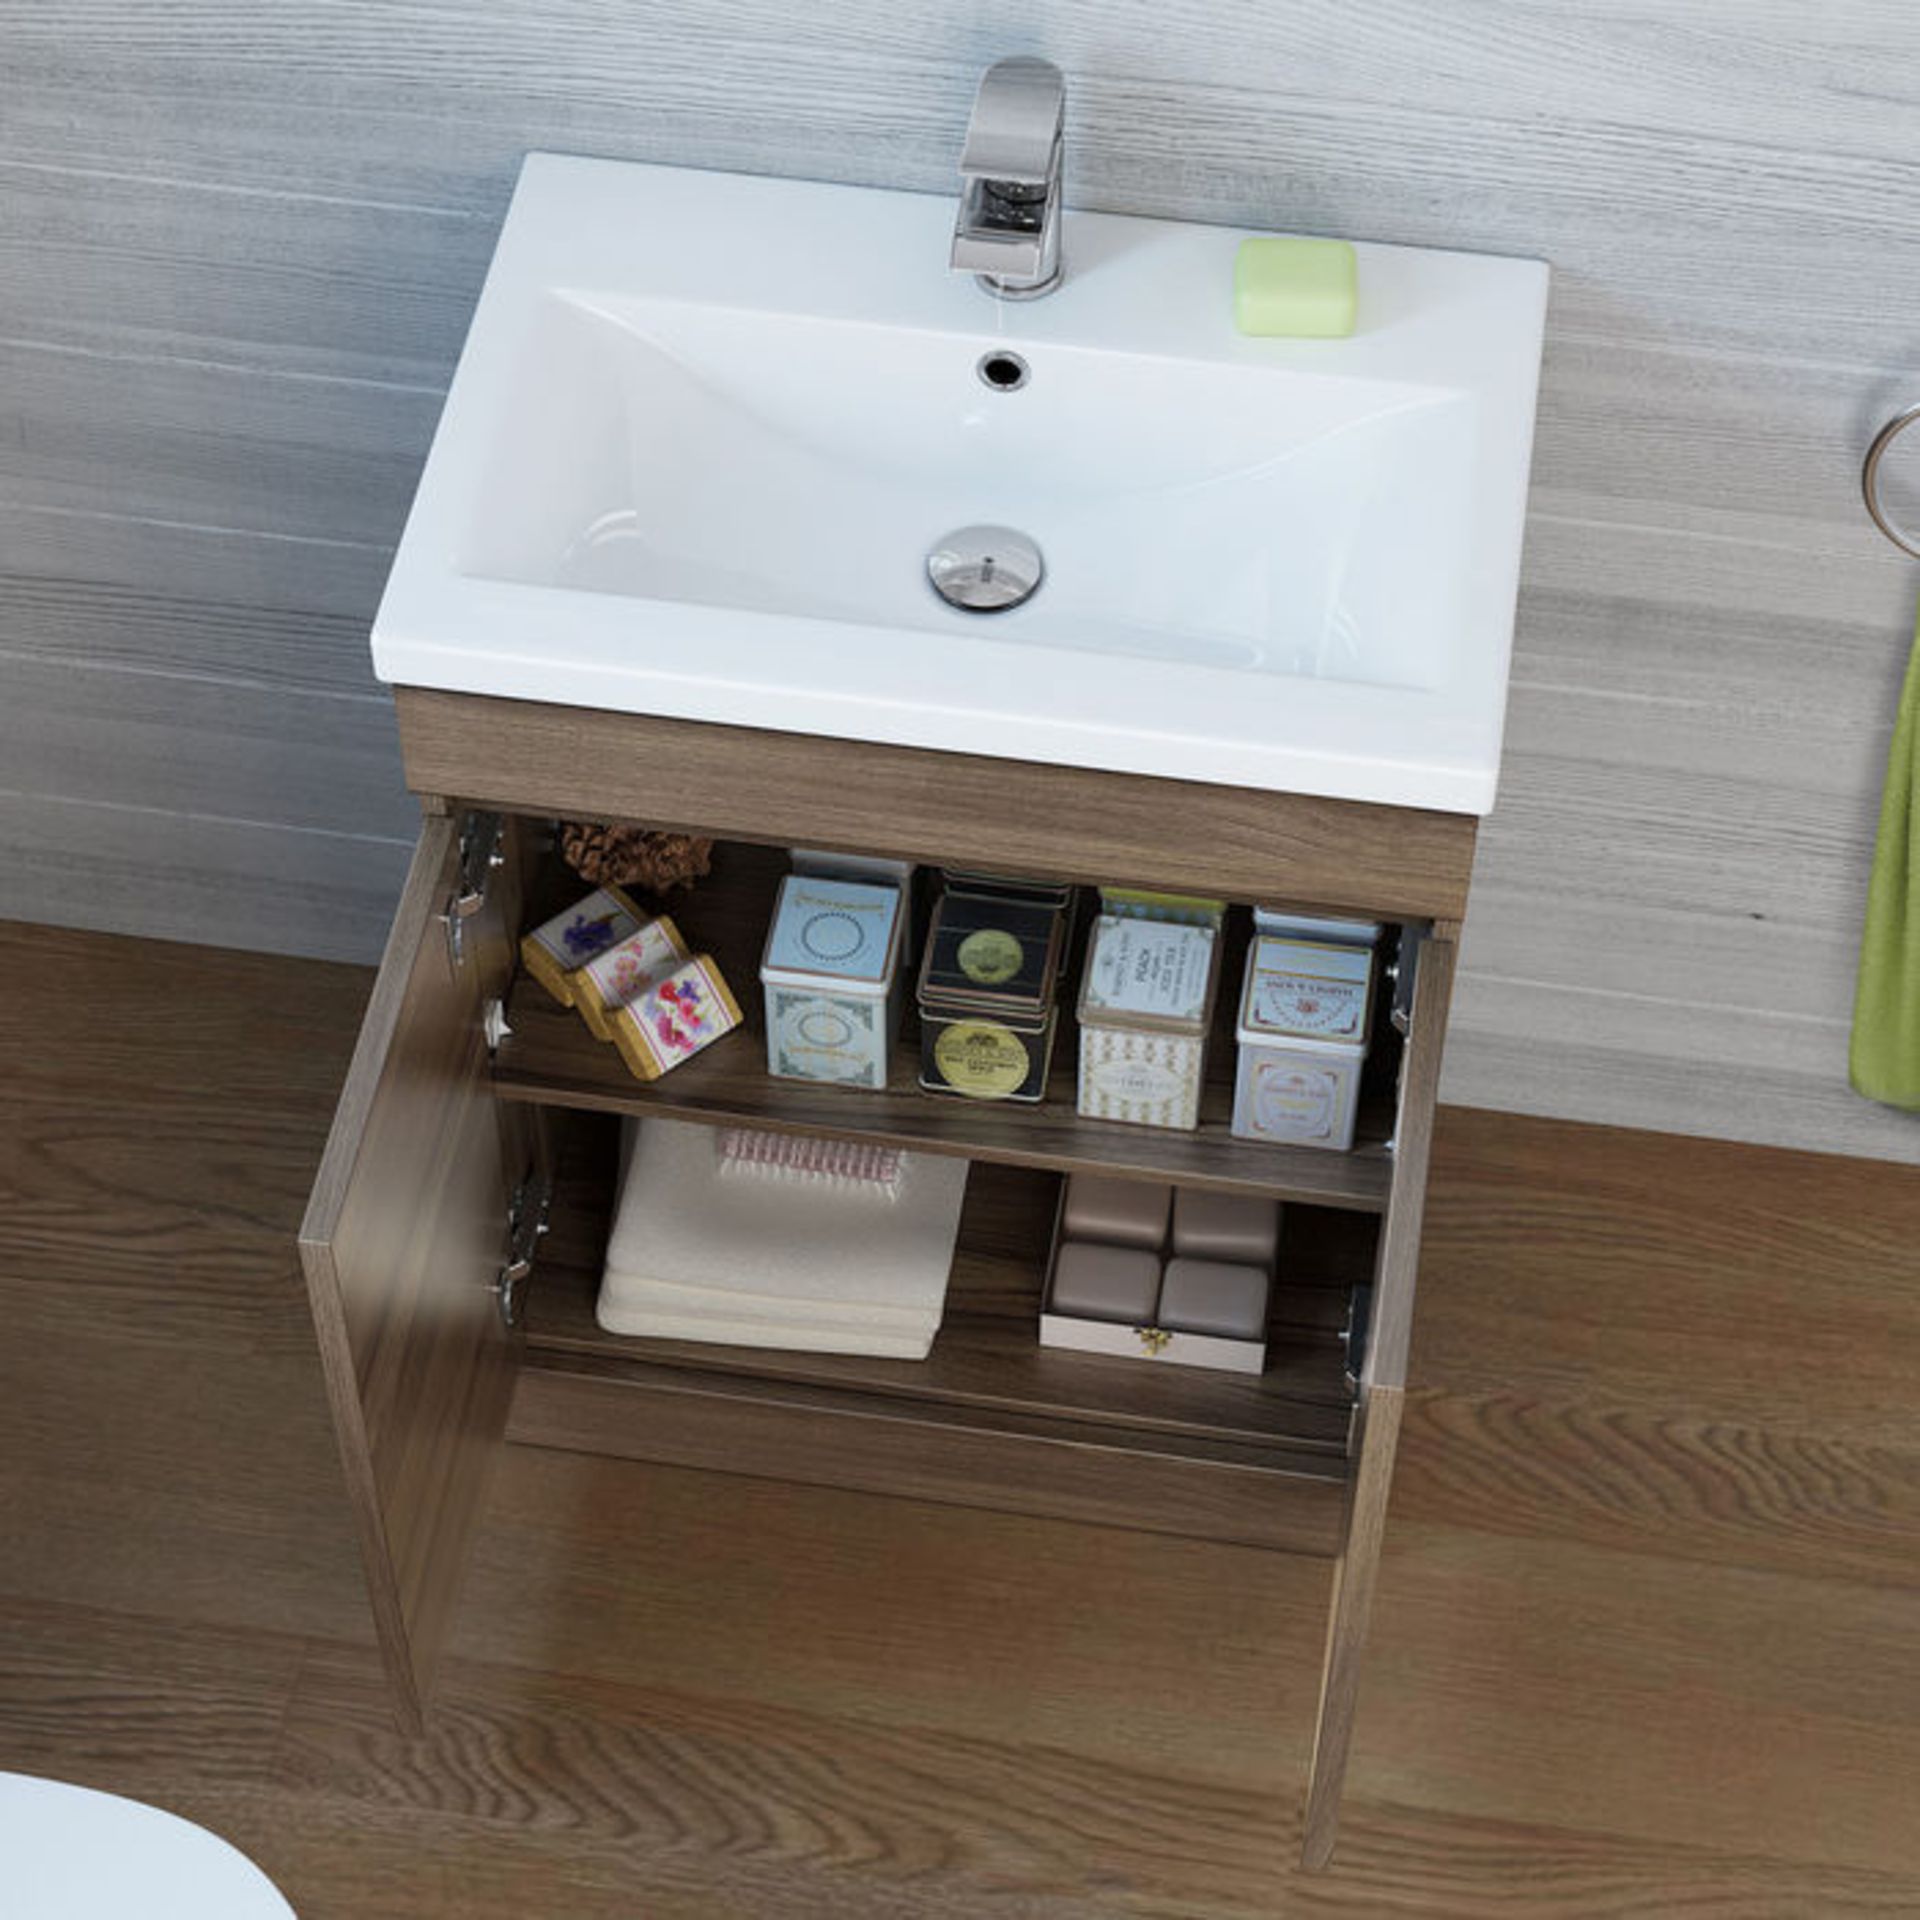 (ZZ52) 600mm Trent Walnut Effect Basin Cabinet - Floor Standing. RRP £499.99. COMES COMPLETE WITH - Image 2 of 4